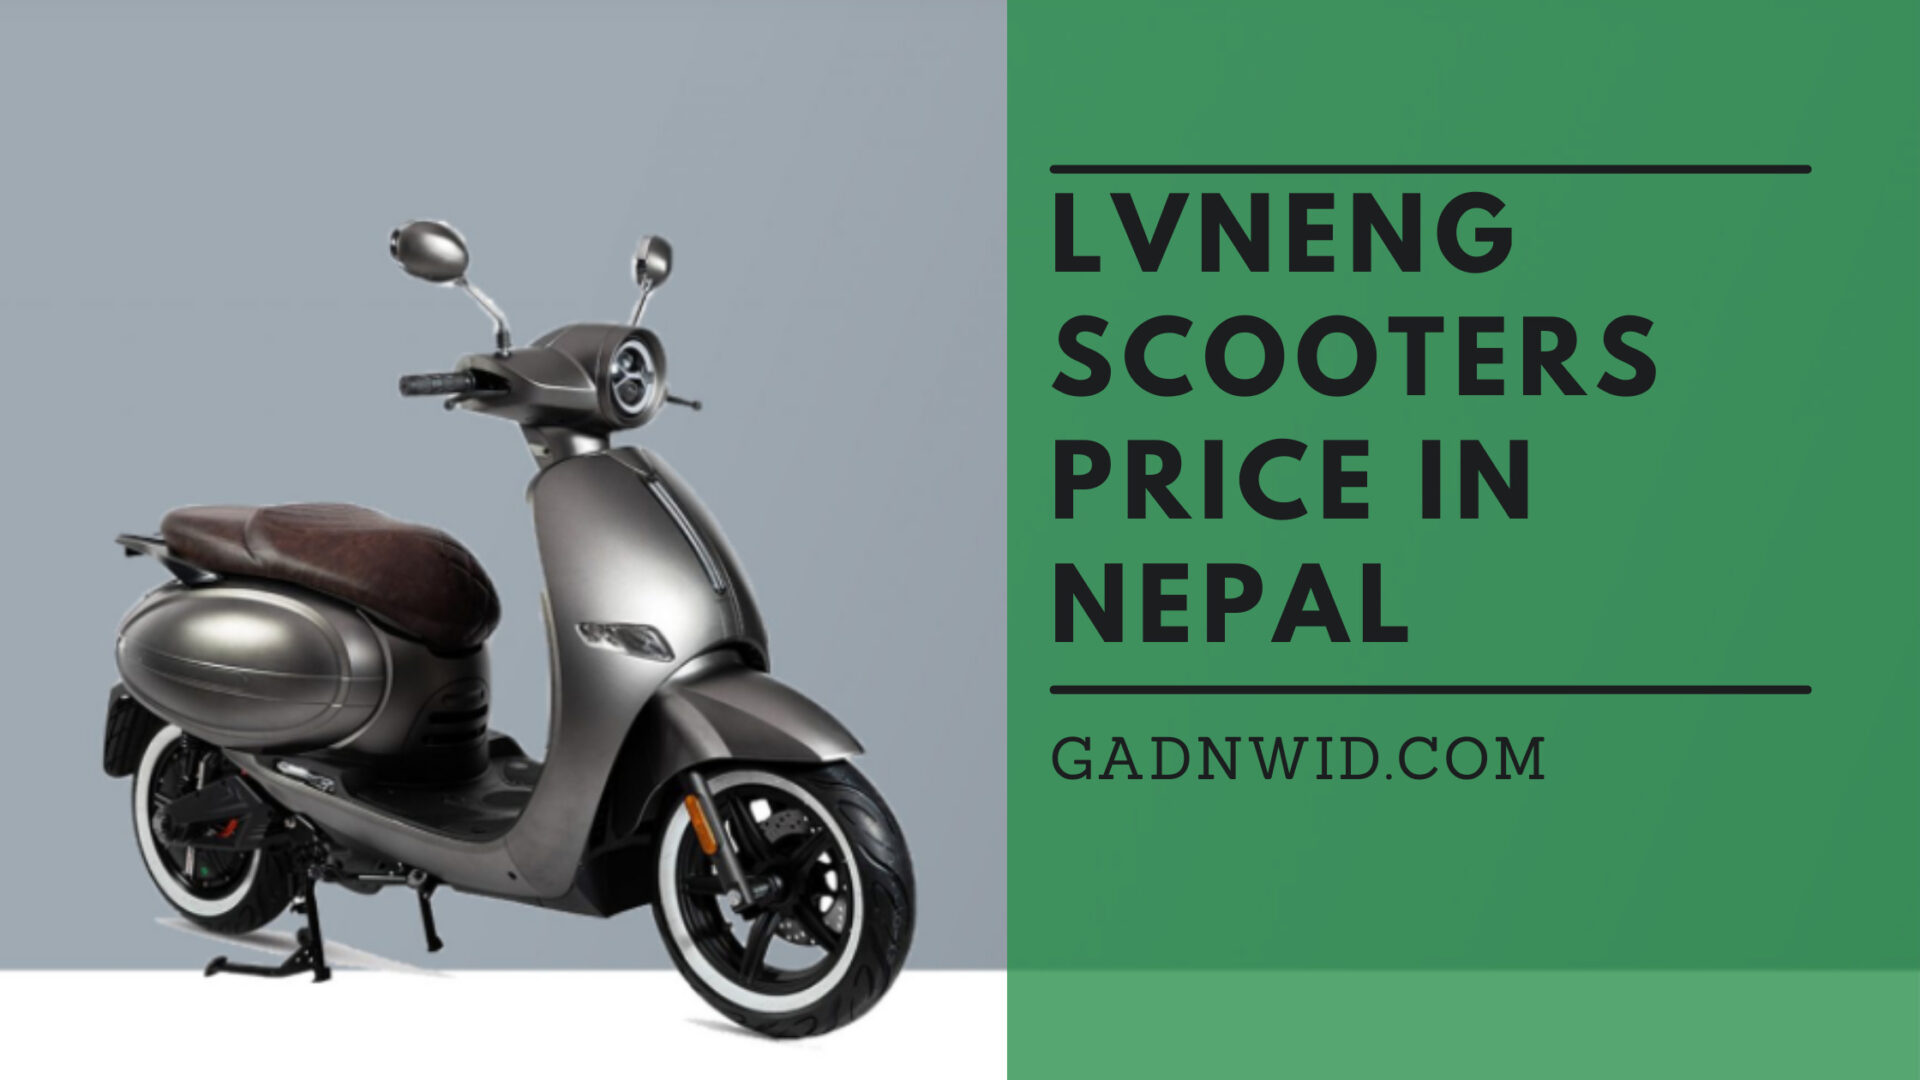 lvneng scooters price in Nepal